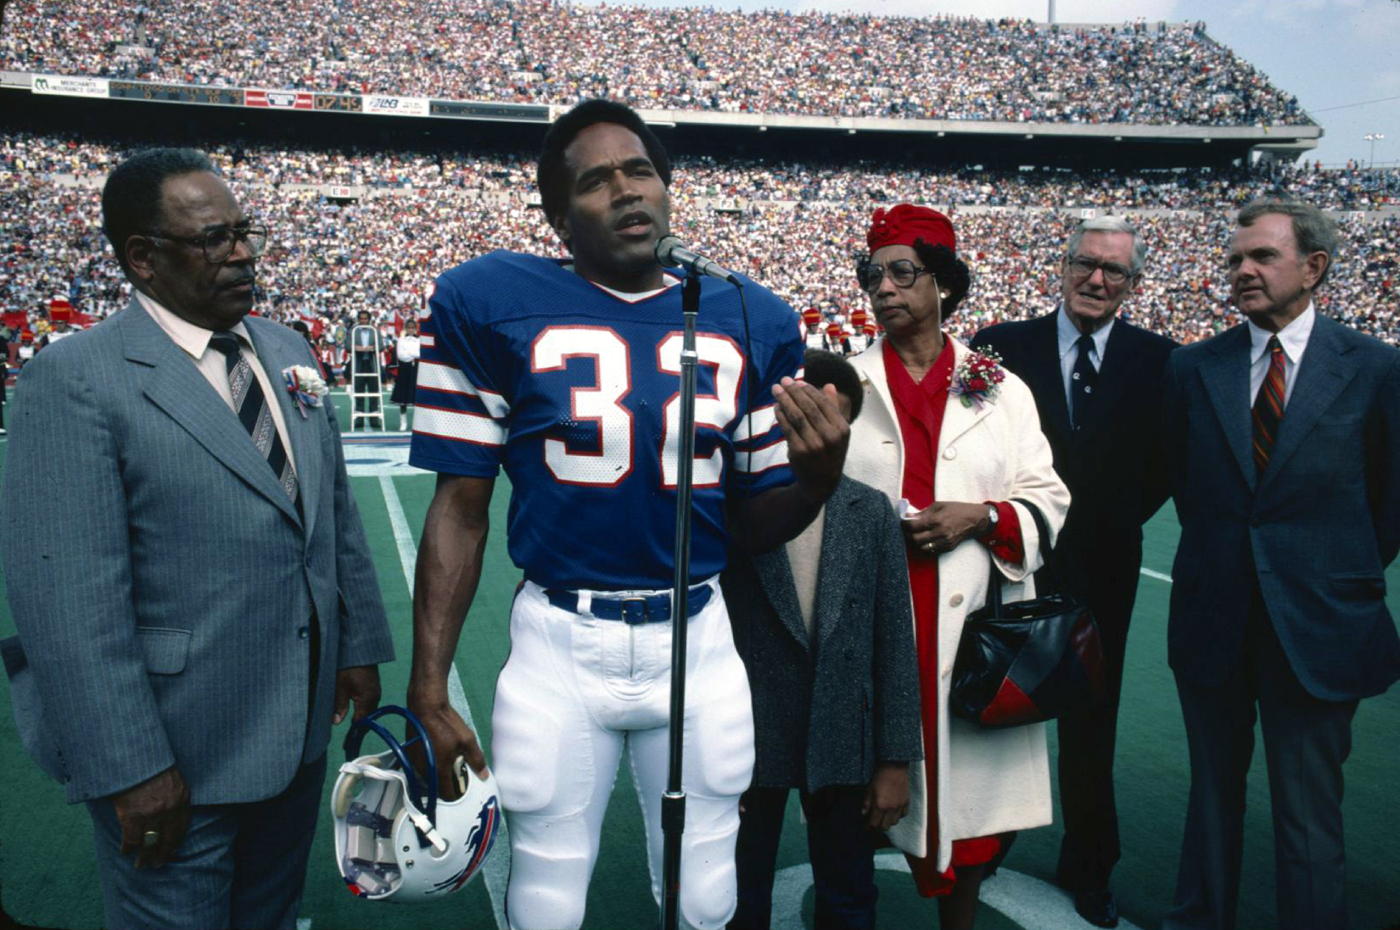 OJ Simpson reveals who his quickly becoming his favorite NFL player.